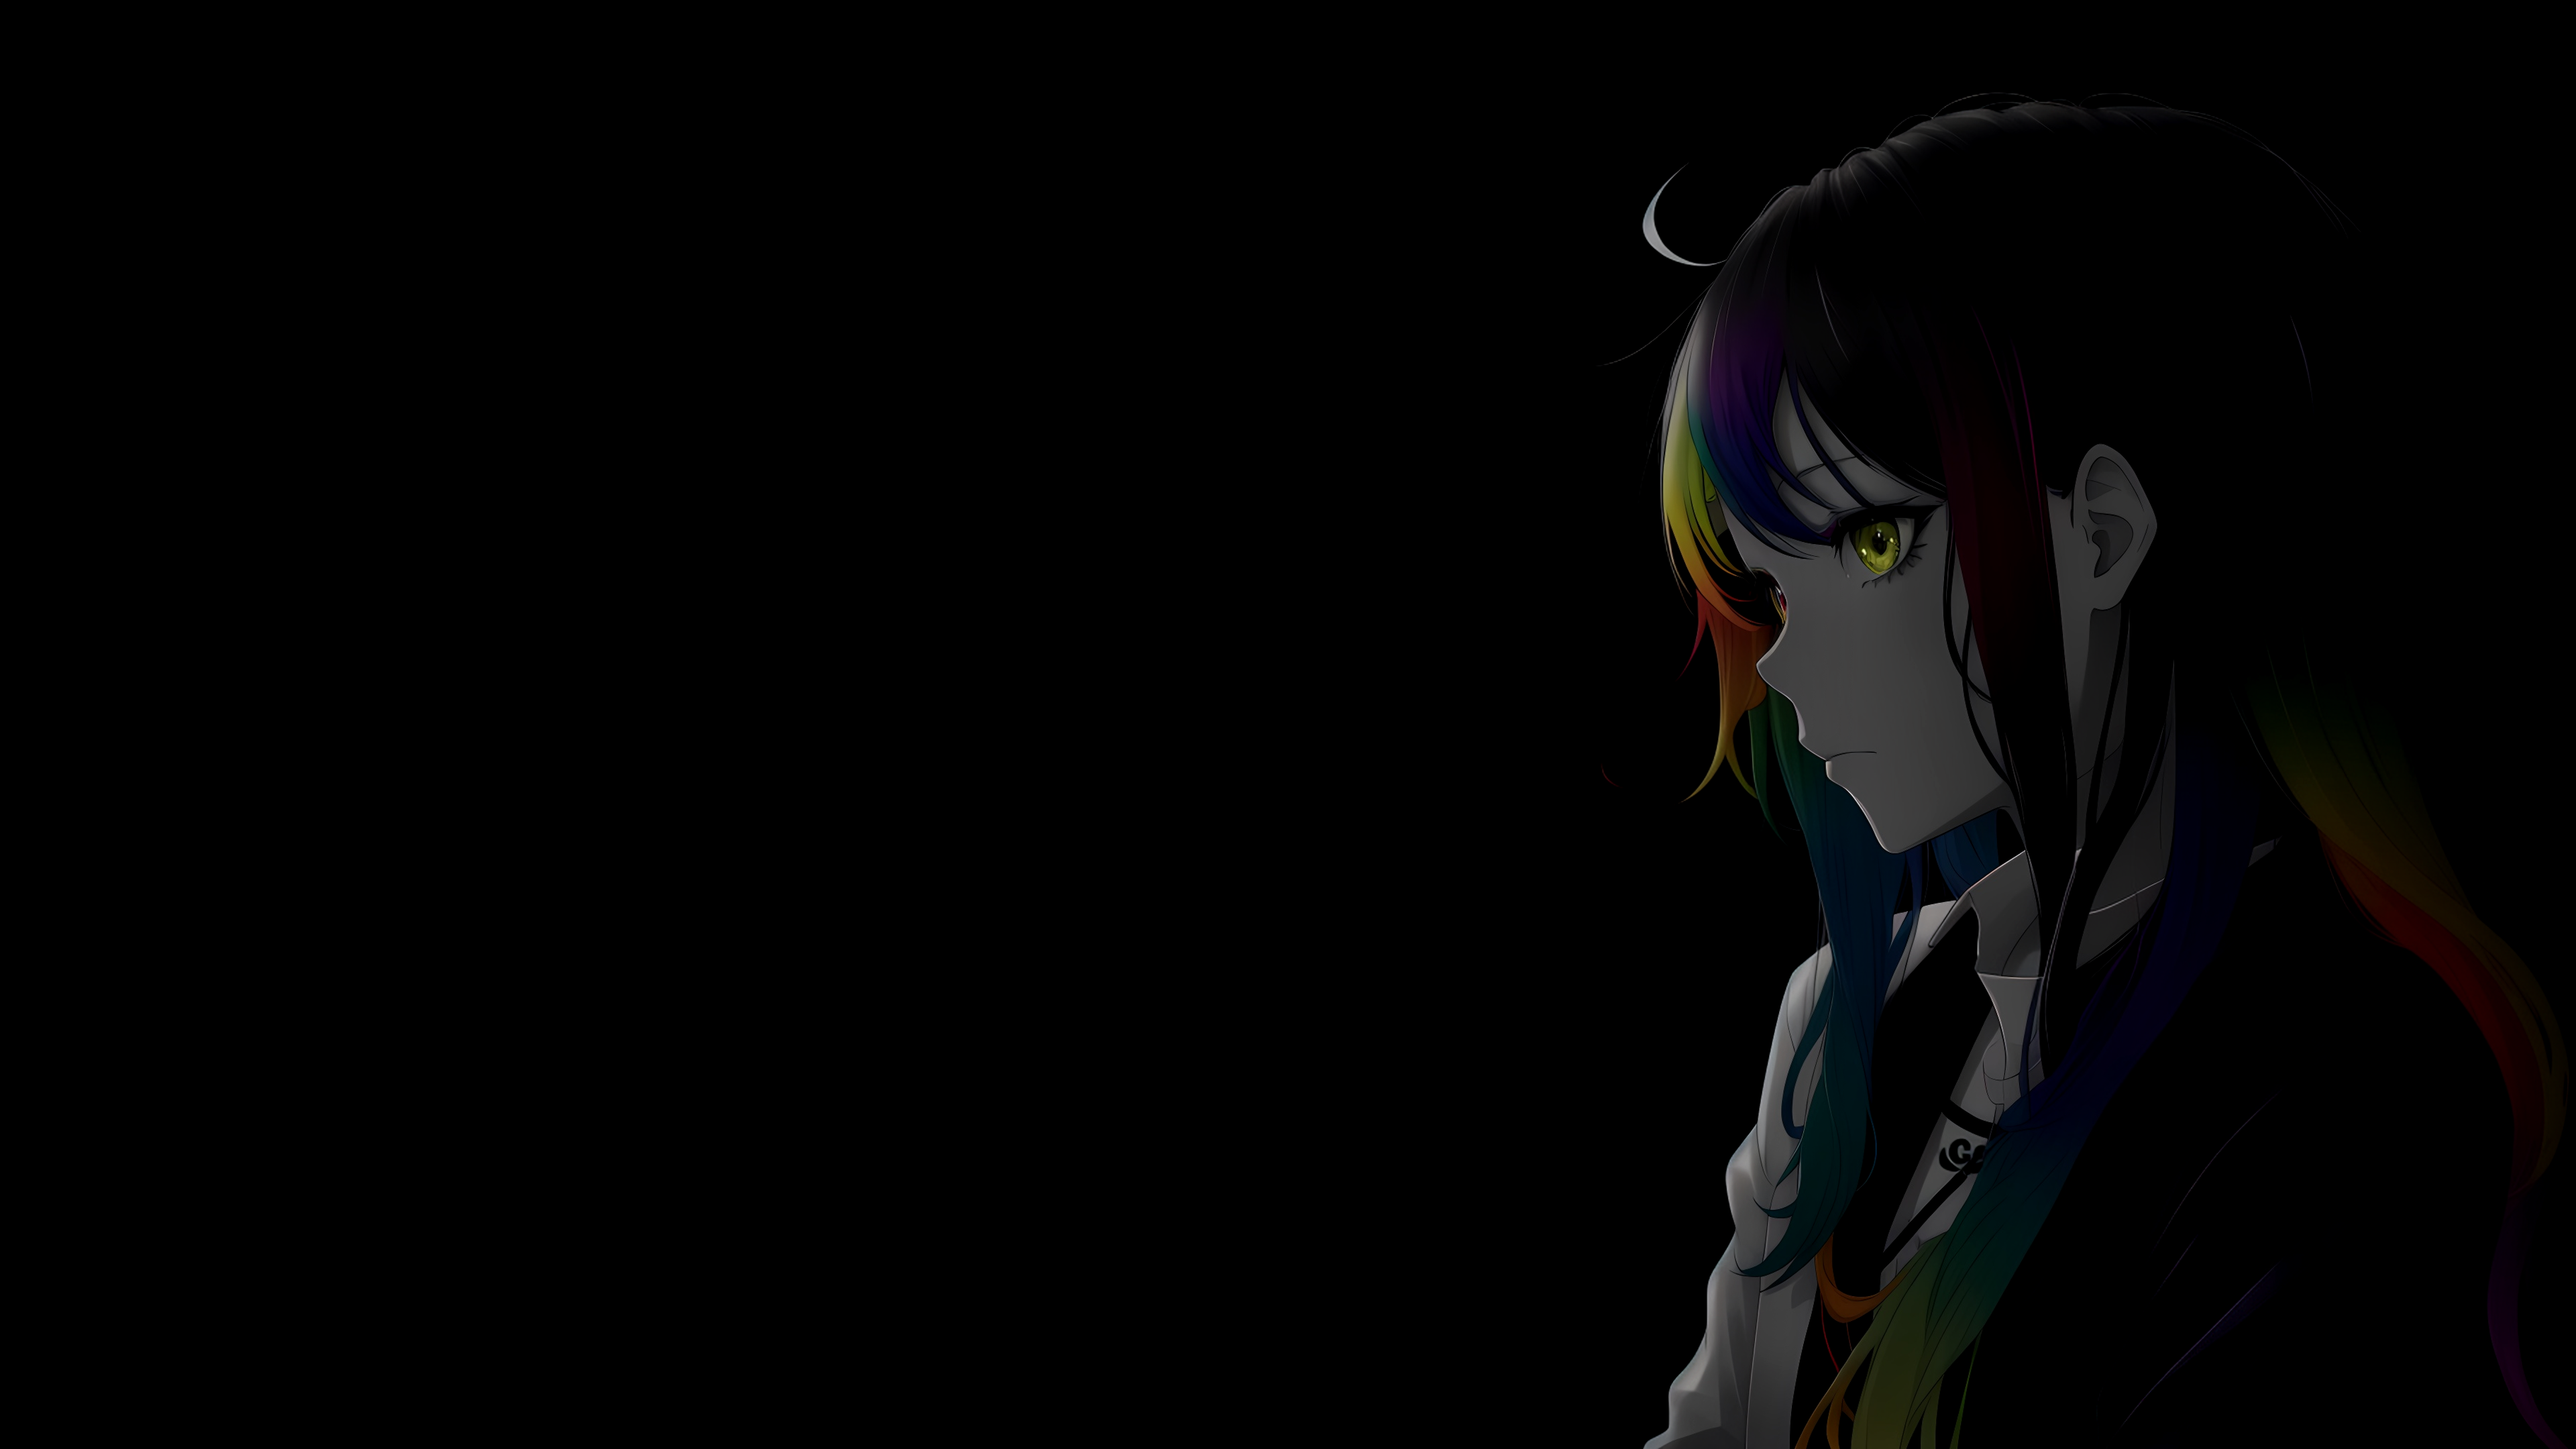 Anime 3840x2160 black background selective coloring anime girls multi-colored hair minimalism heterochromia simple background AI art